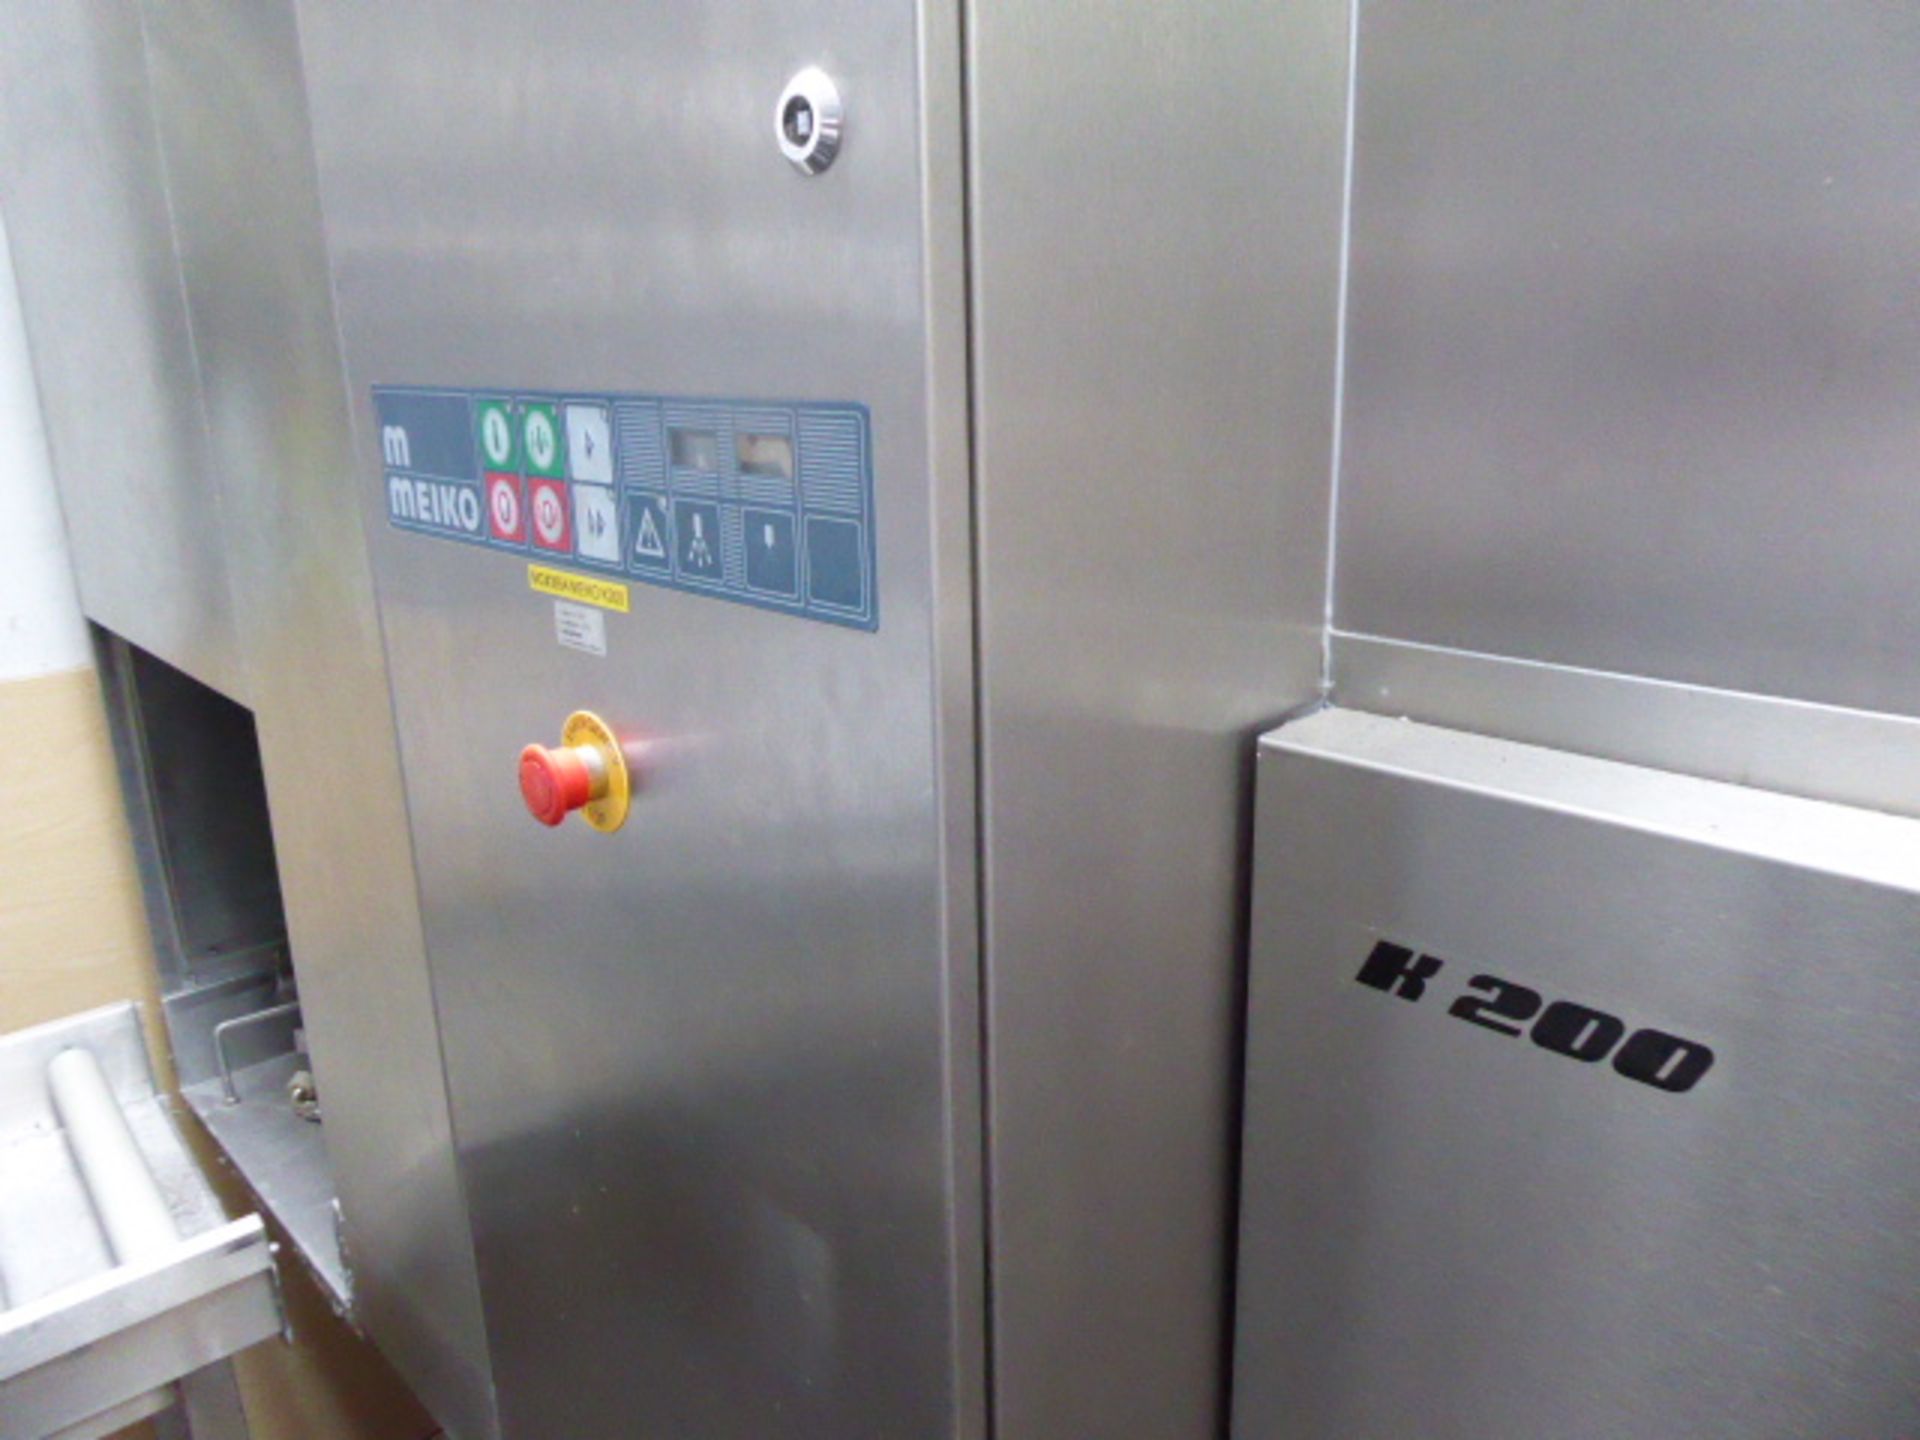 Meiko model K200 deck type dishwasher with an 150 cm pre rinse and waste disposal unit and a - Image 5 of 5